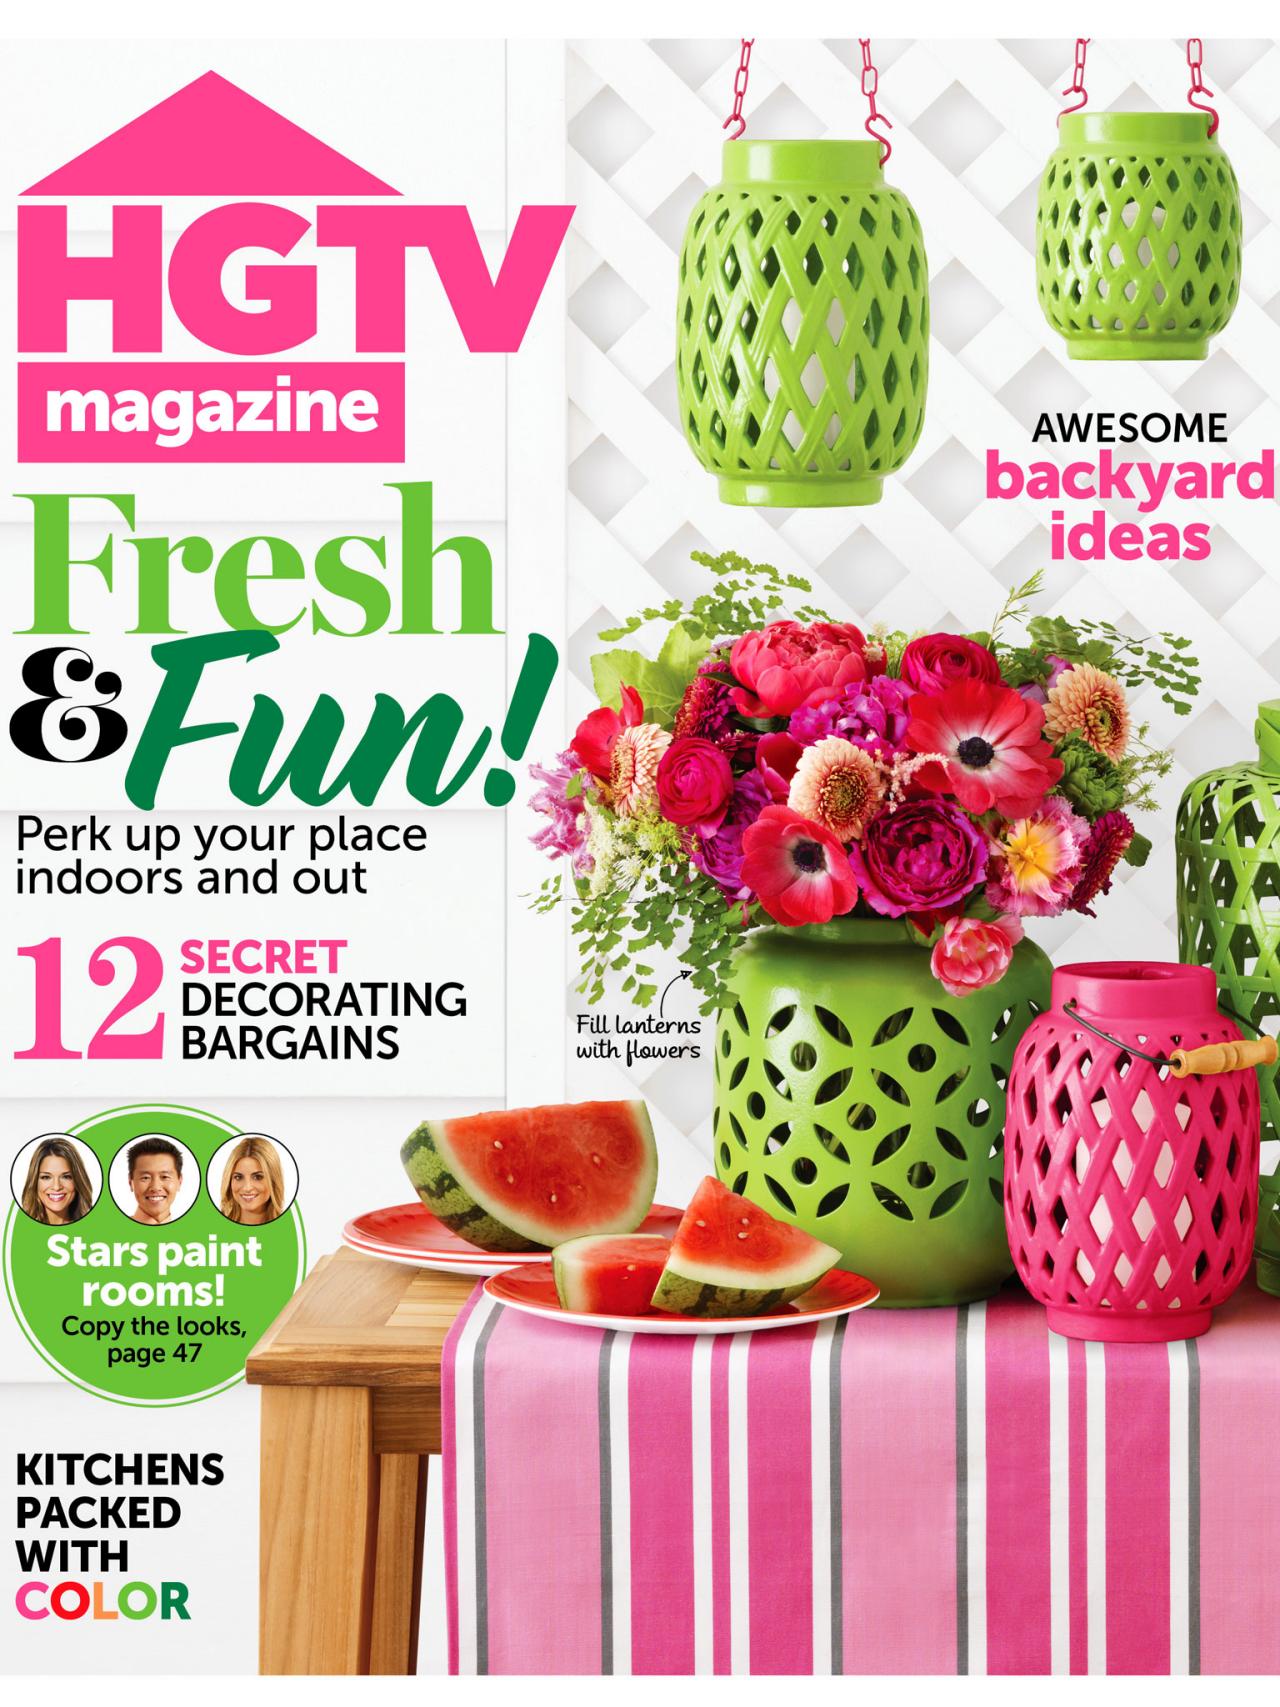 RX-HGMAG022_July-August-2014-cover-3x4.jpg.rend.hgtvcom.1280.1707.jpeg